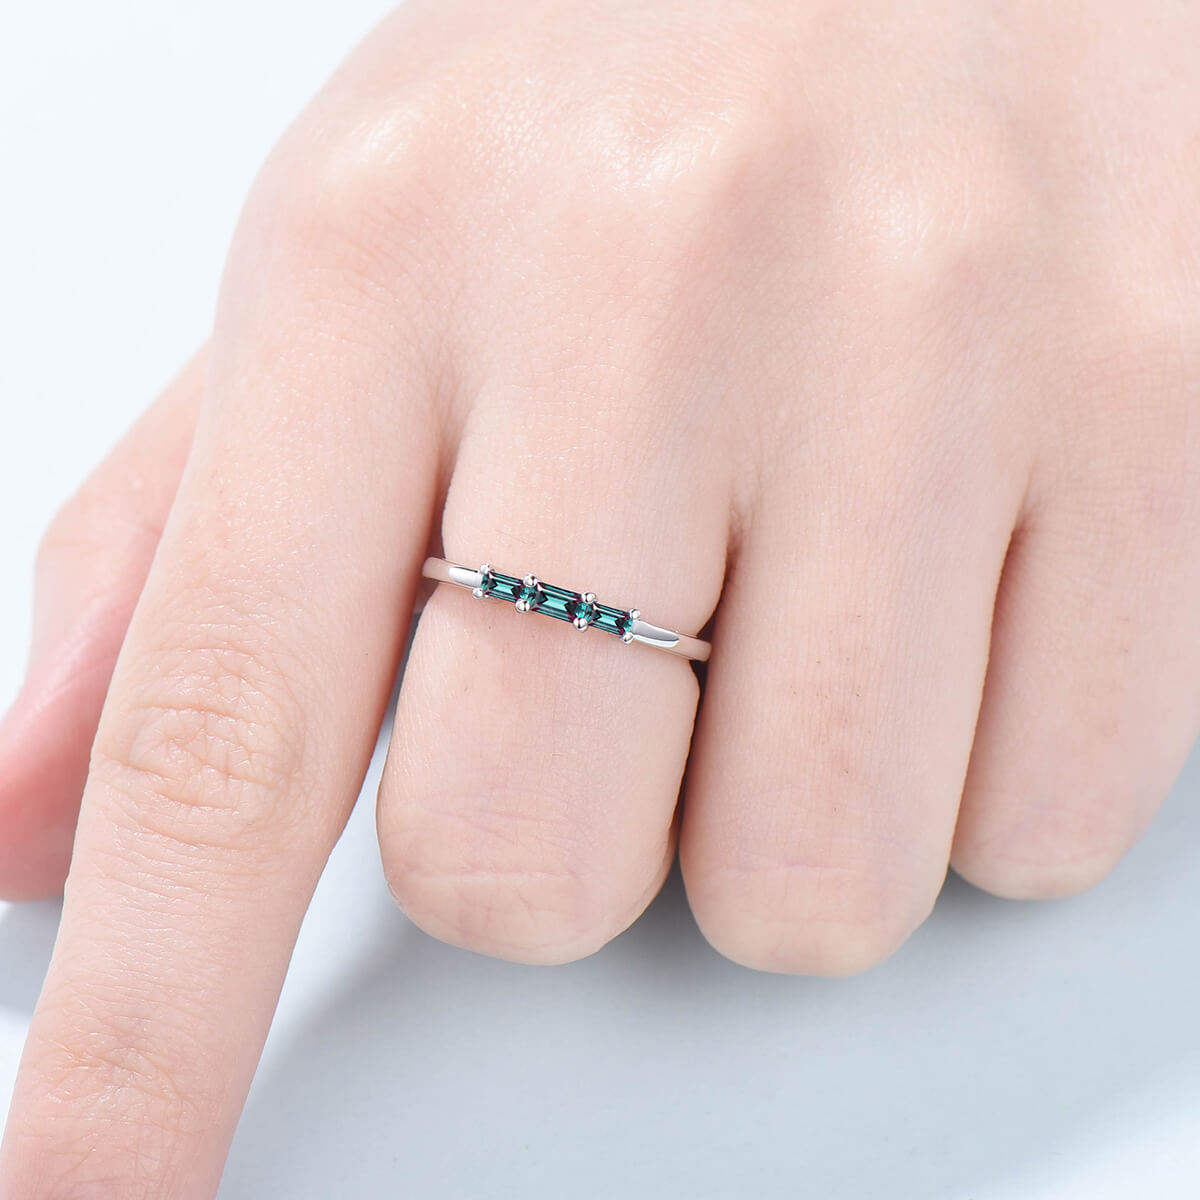 East to West Baguette Alexandrite Ring three stone Color Change Stone Wedding Ring Stacking Dainty Ring June Birthstone Anniversary Gift - PENFINE